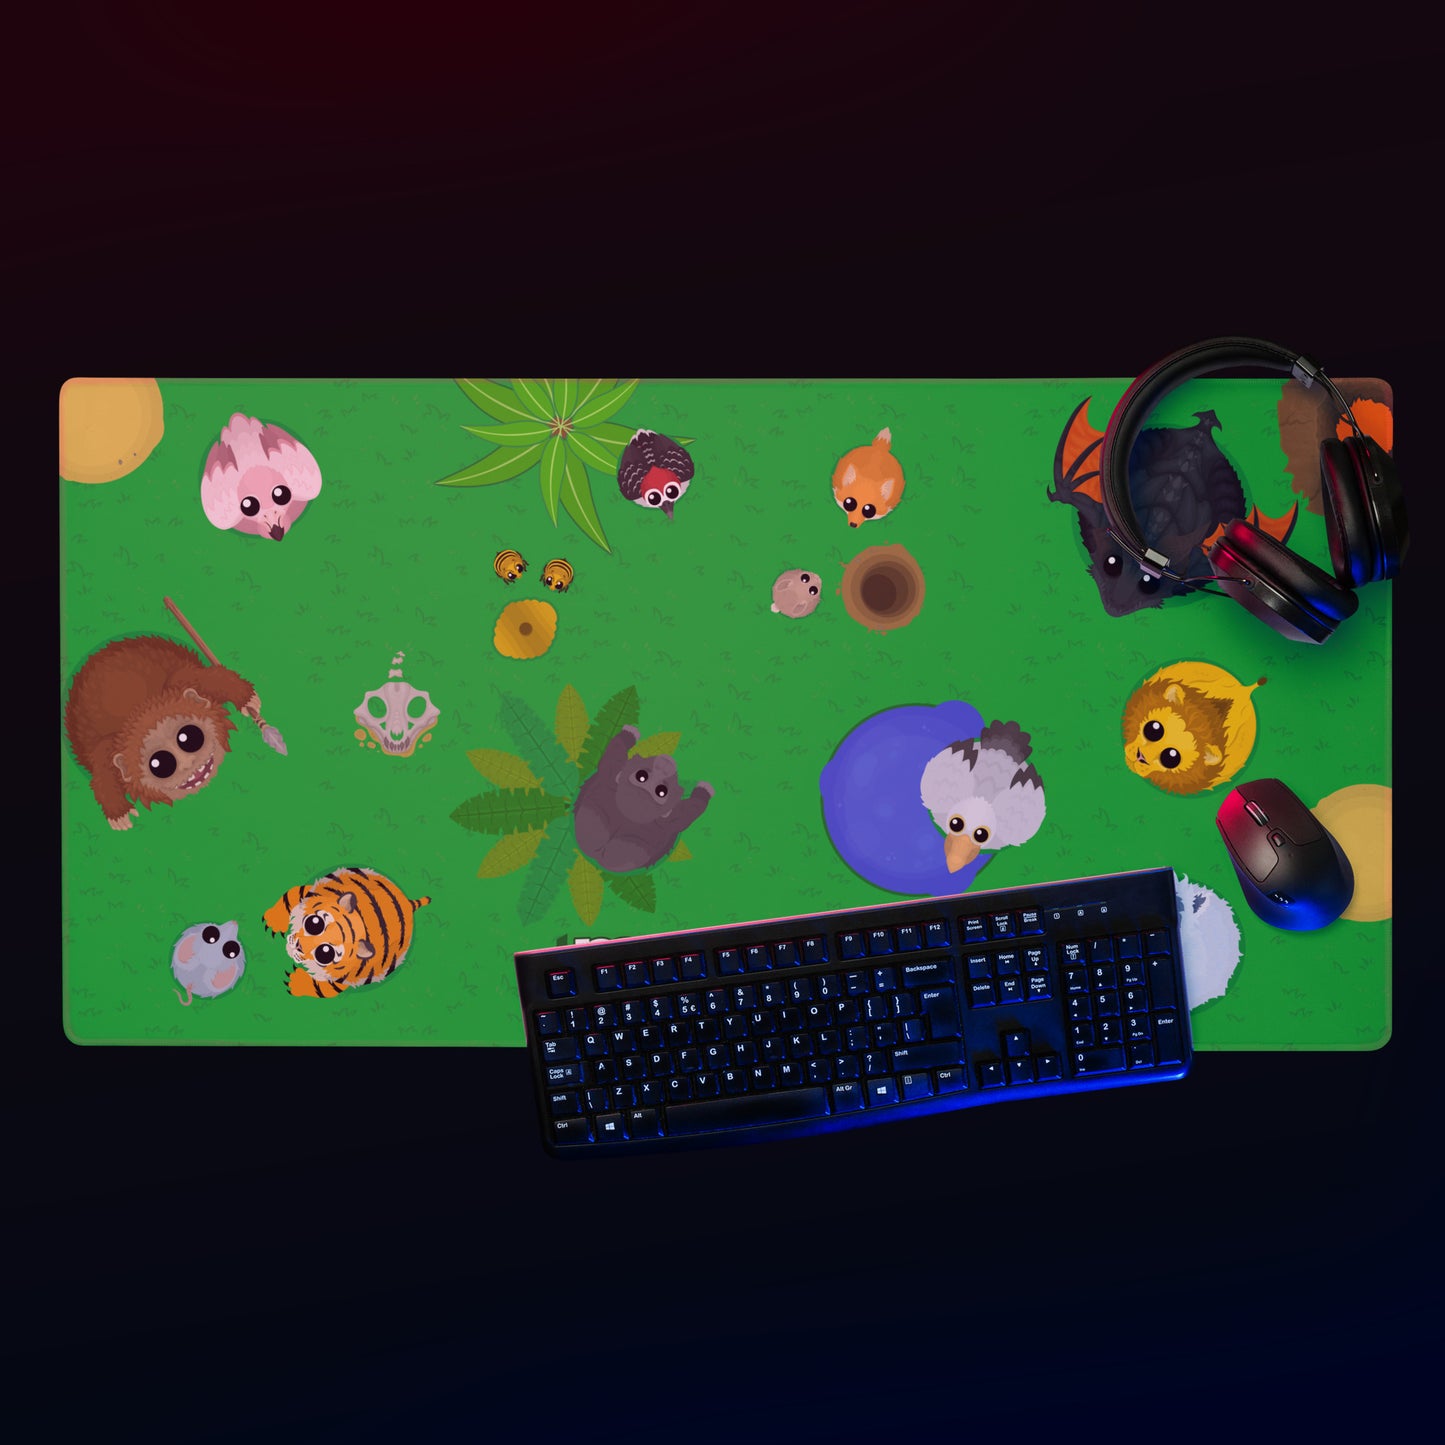 Mope Gaming mouse pad